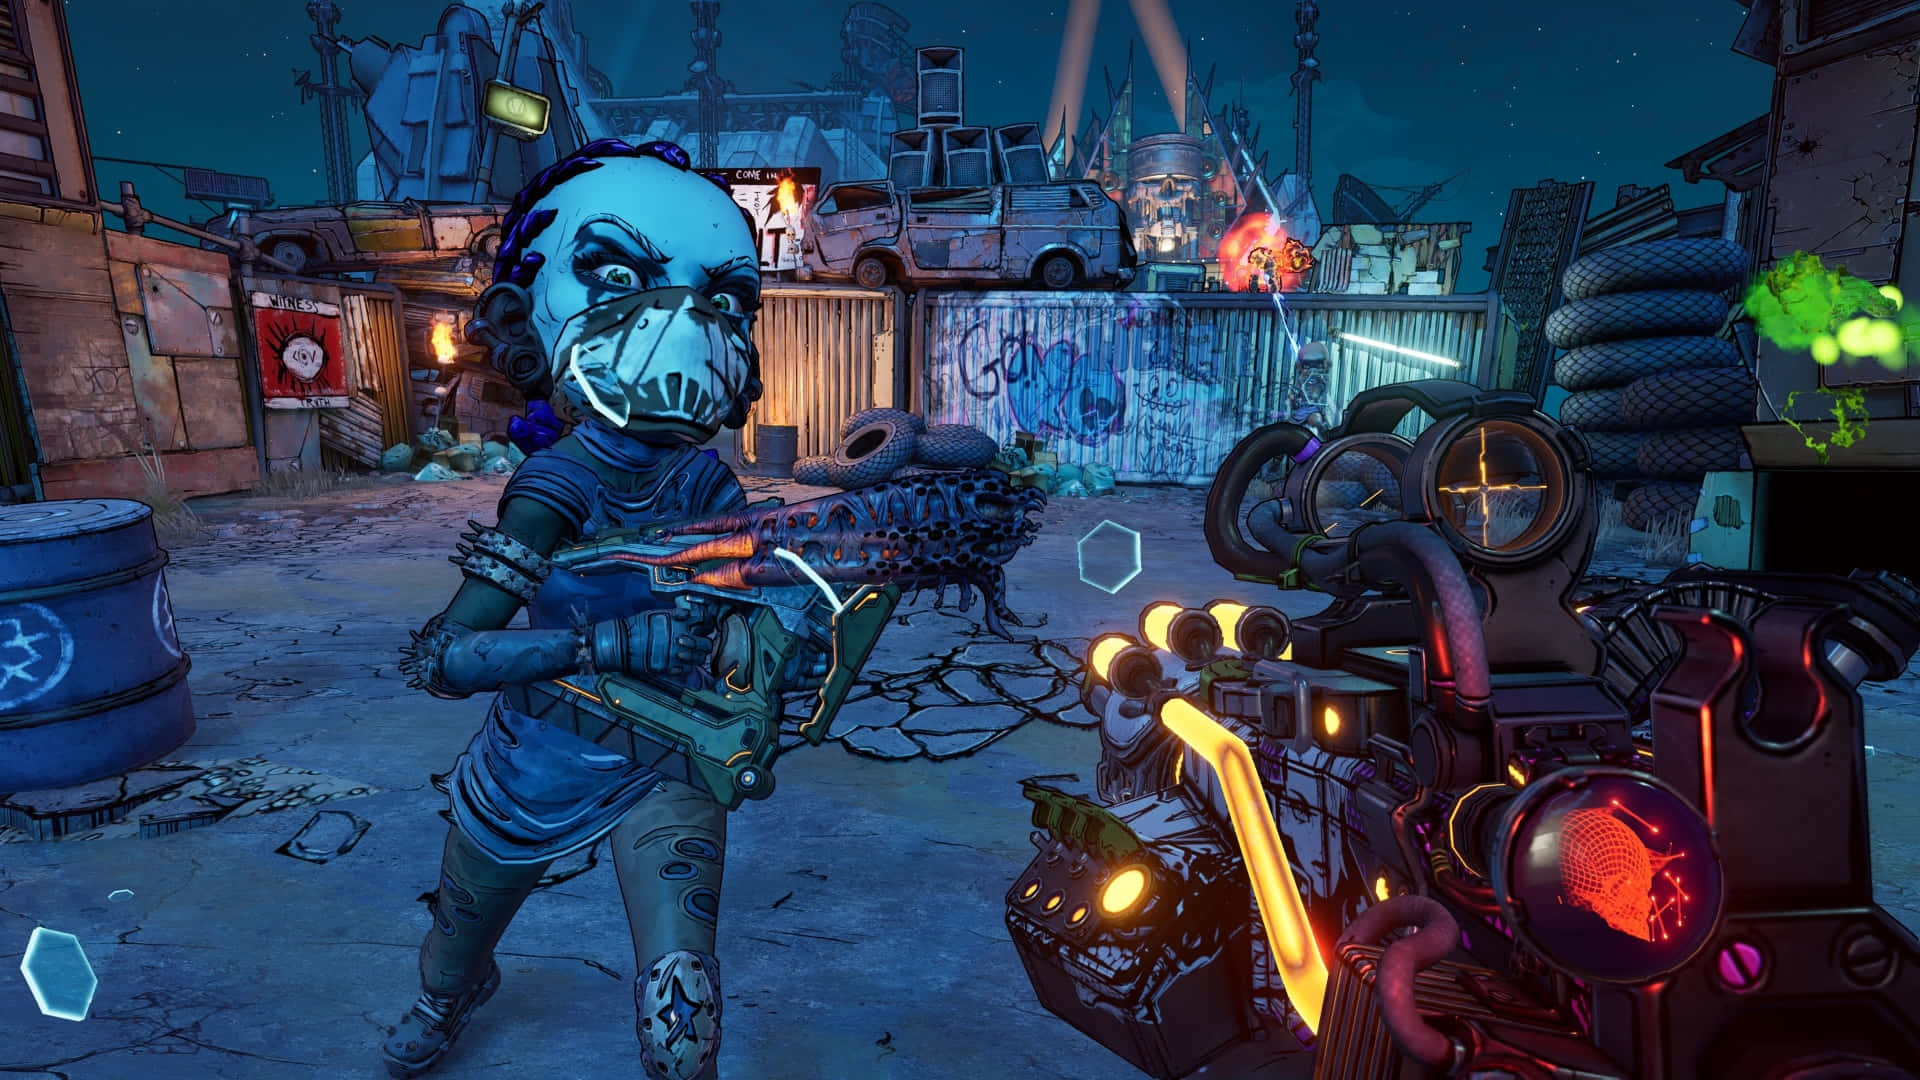 Get Ready for the Best Borderlands 3 Experience